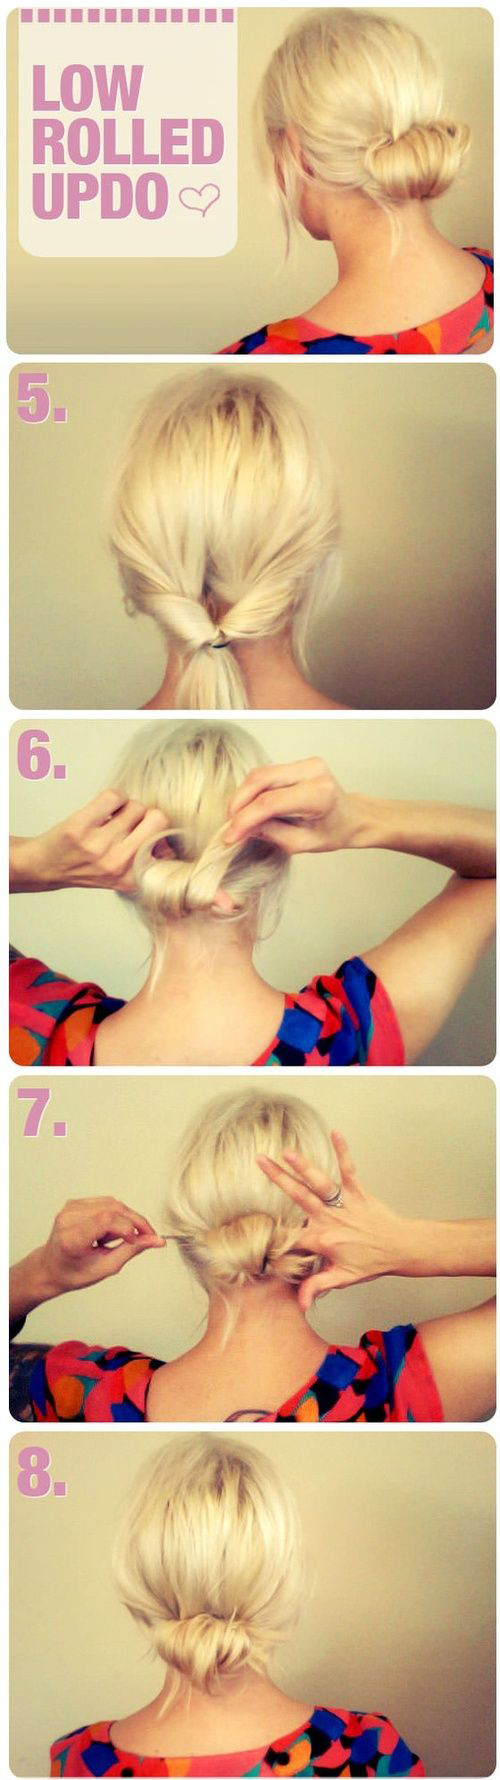 How to braid low rolled updo